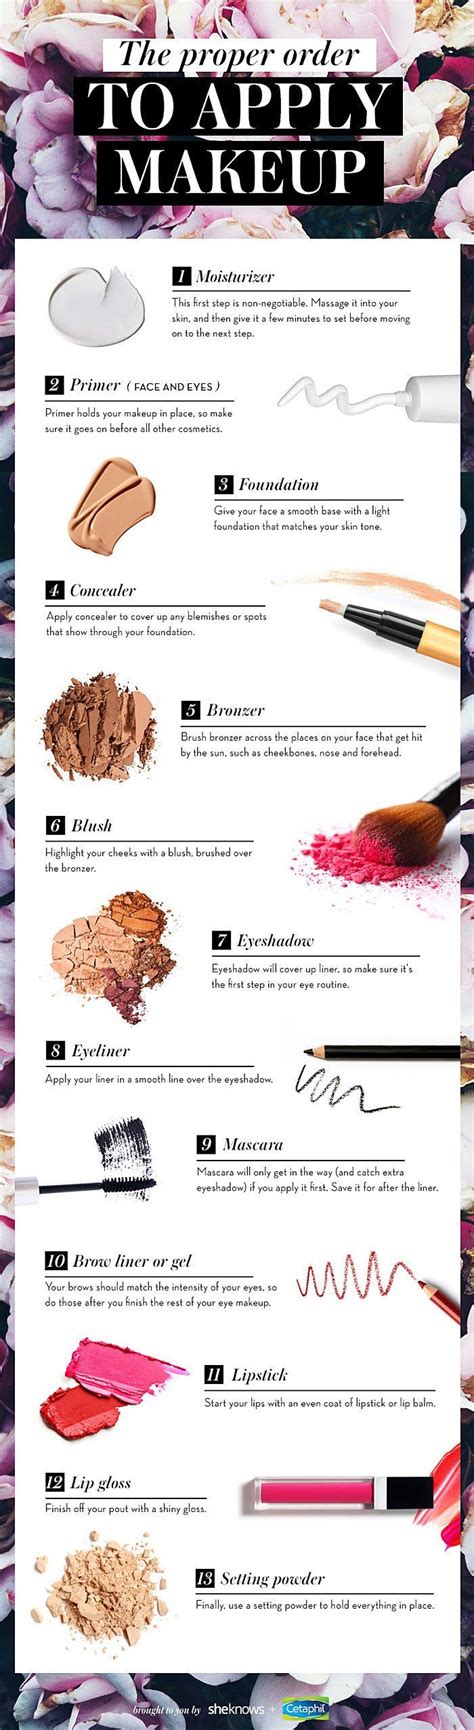 Yes There Is A Correct Makeup Application Order And This Is It How